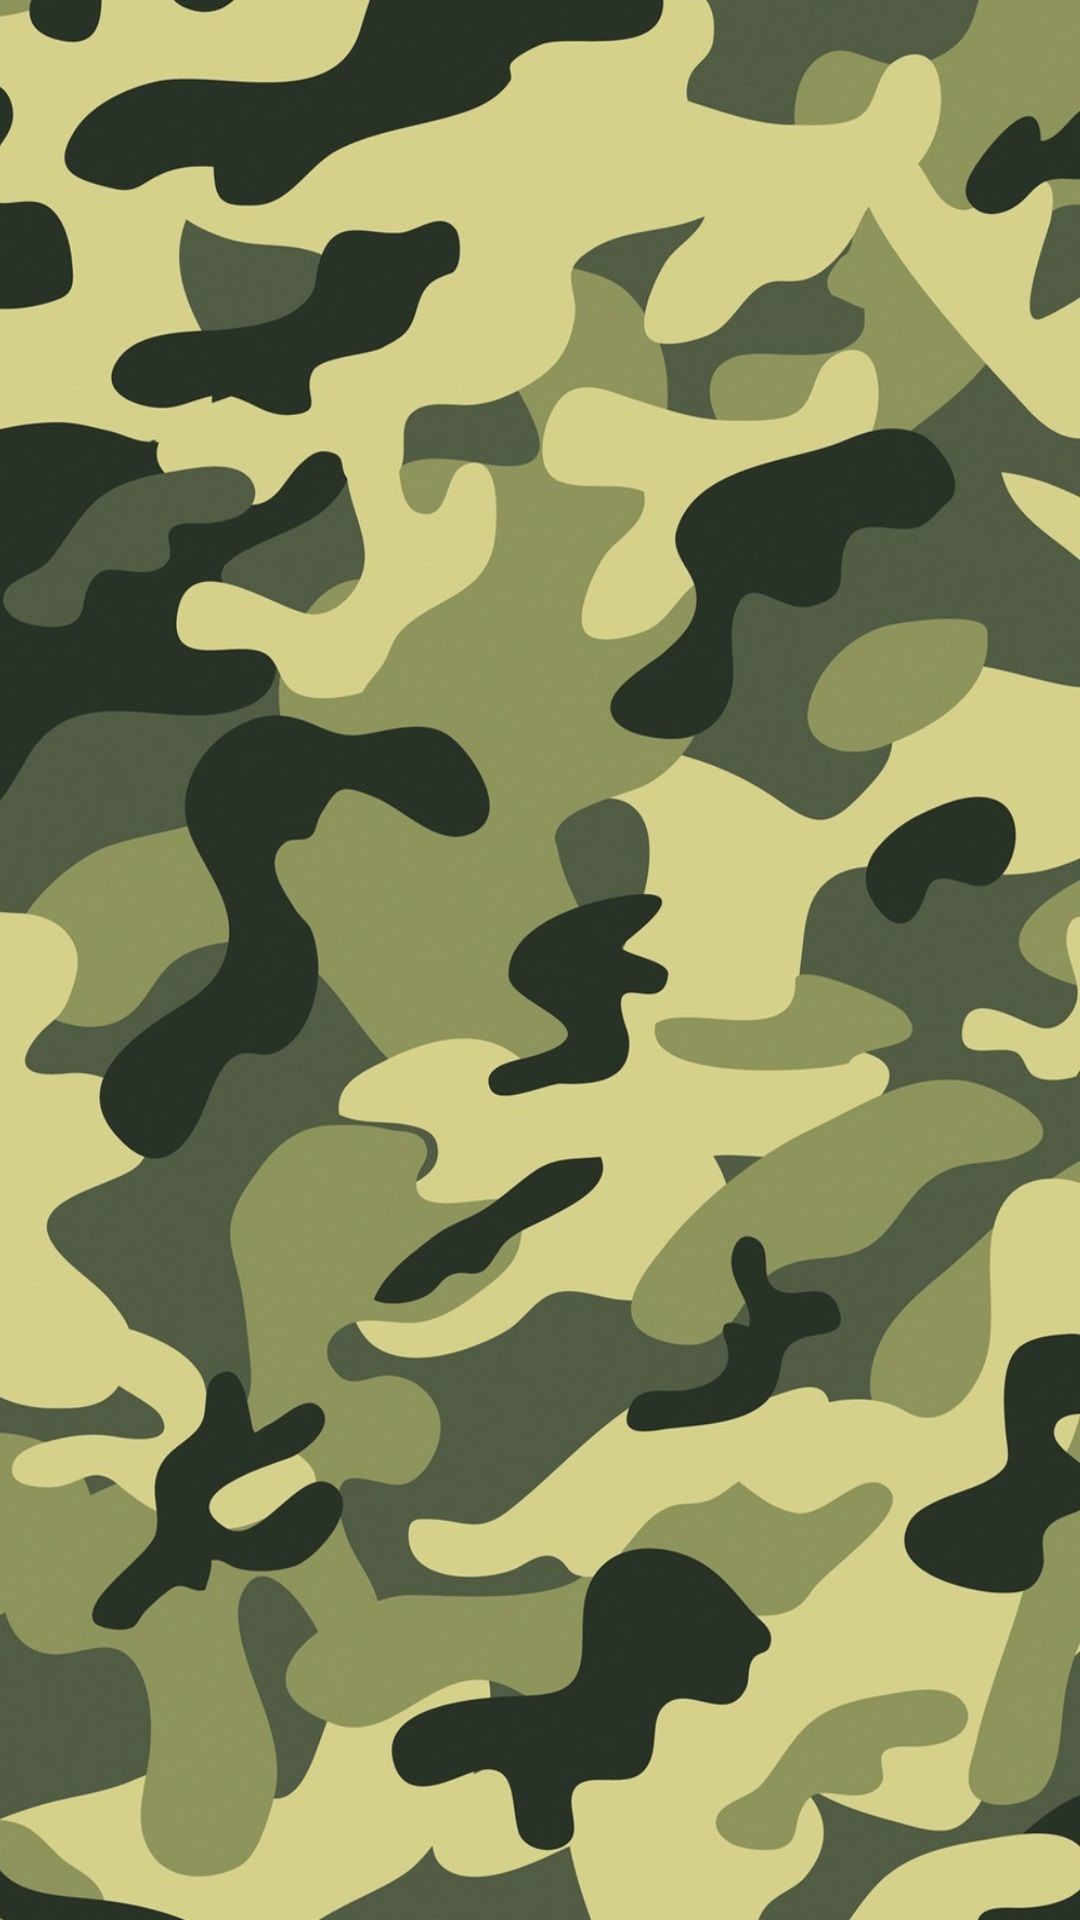 Girly Camo Pink Texture Military Camouflage Stock Vector Royalty Free  1252469656  Shutterstock